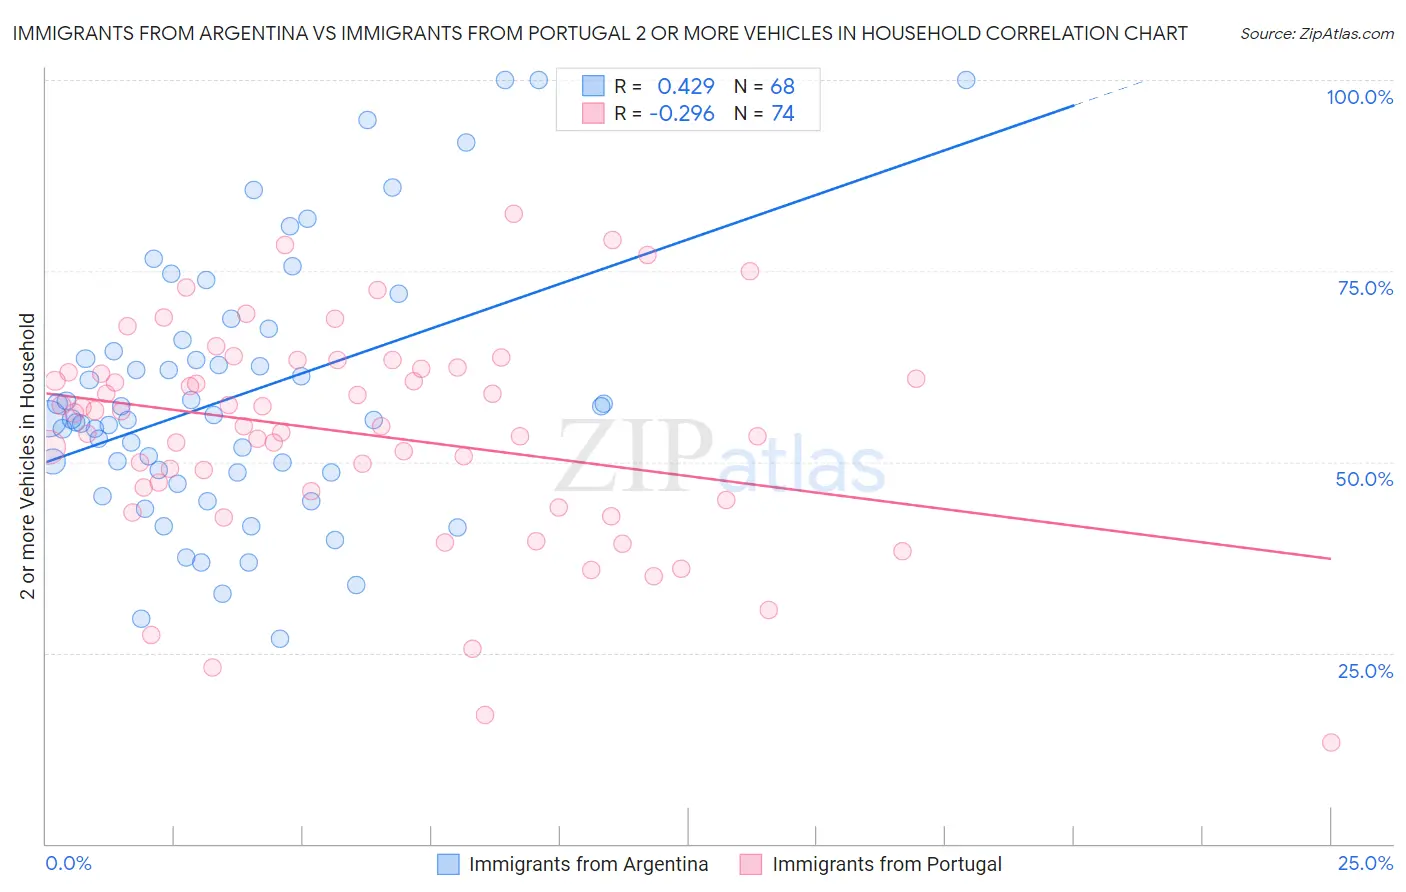 Immigrants from Argentina vs Immigrants from Portugal 2 or more Vehicles in Household